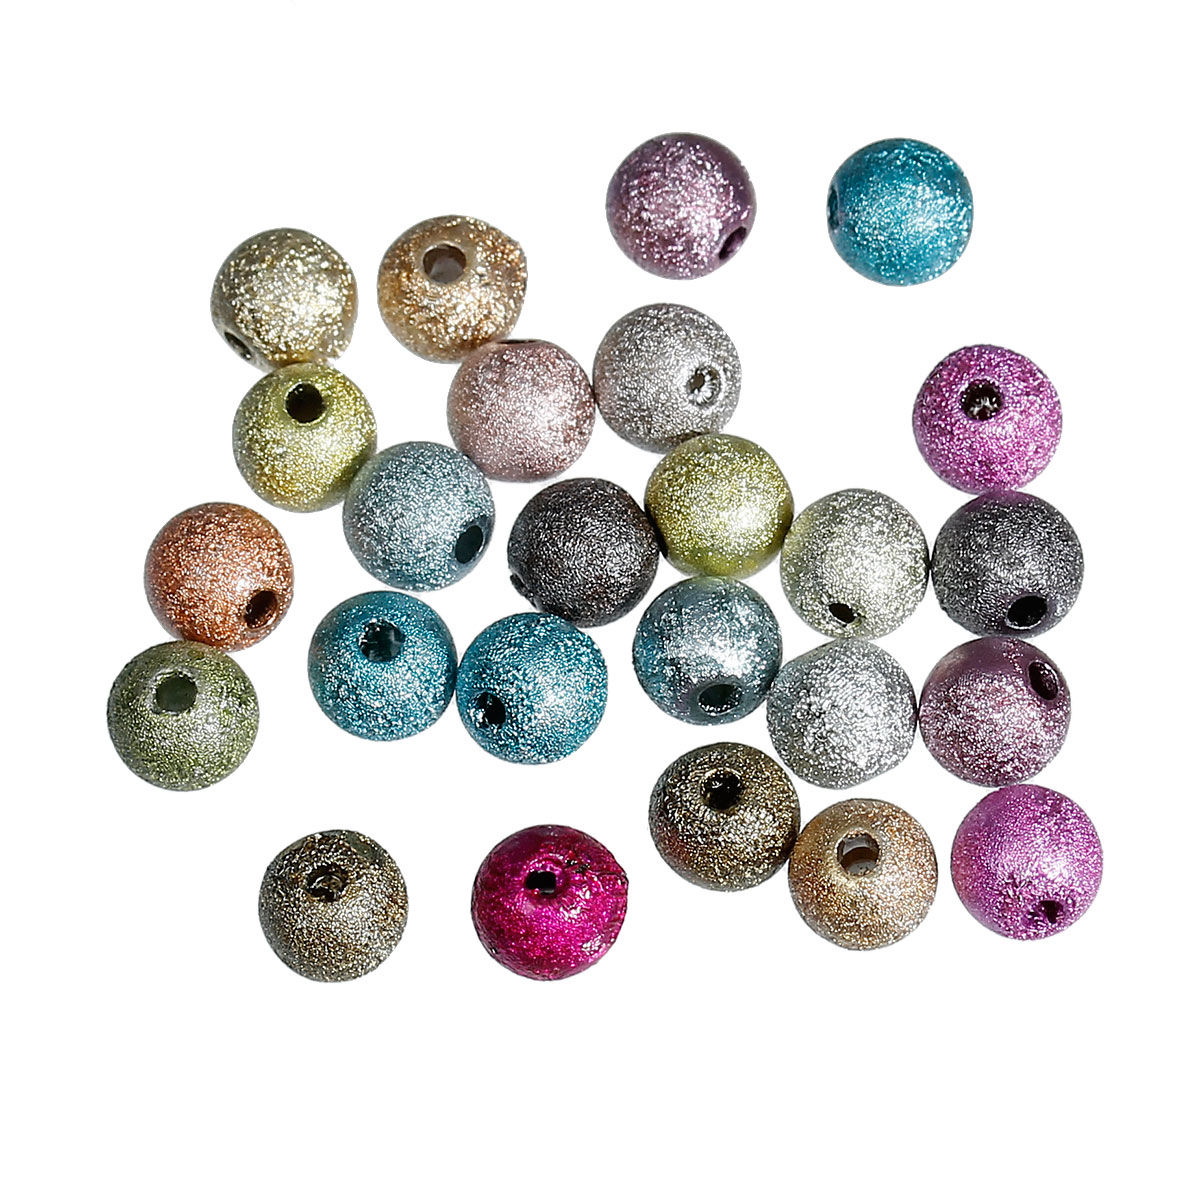 Picture of Acrylic Sparkledust Bubblegum Beads Round At Random About 6mm Dia, Hole: Approx 1mm, 500 PCs